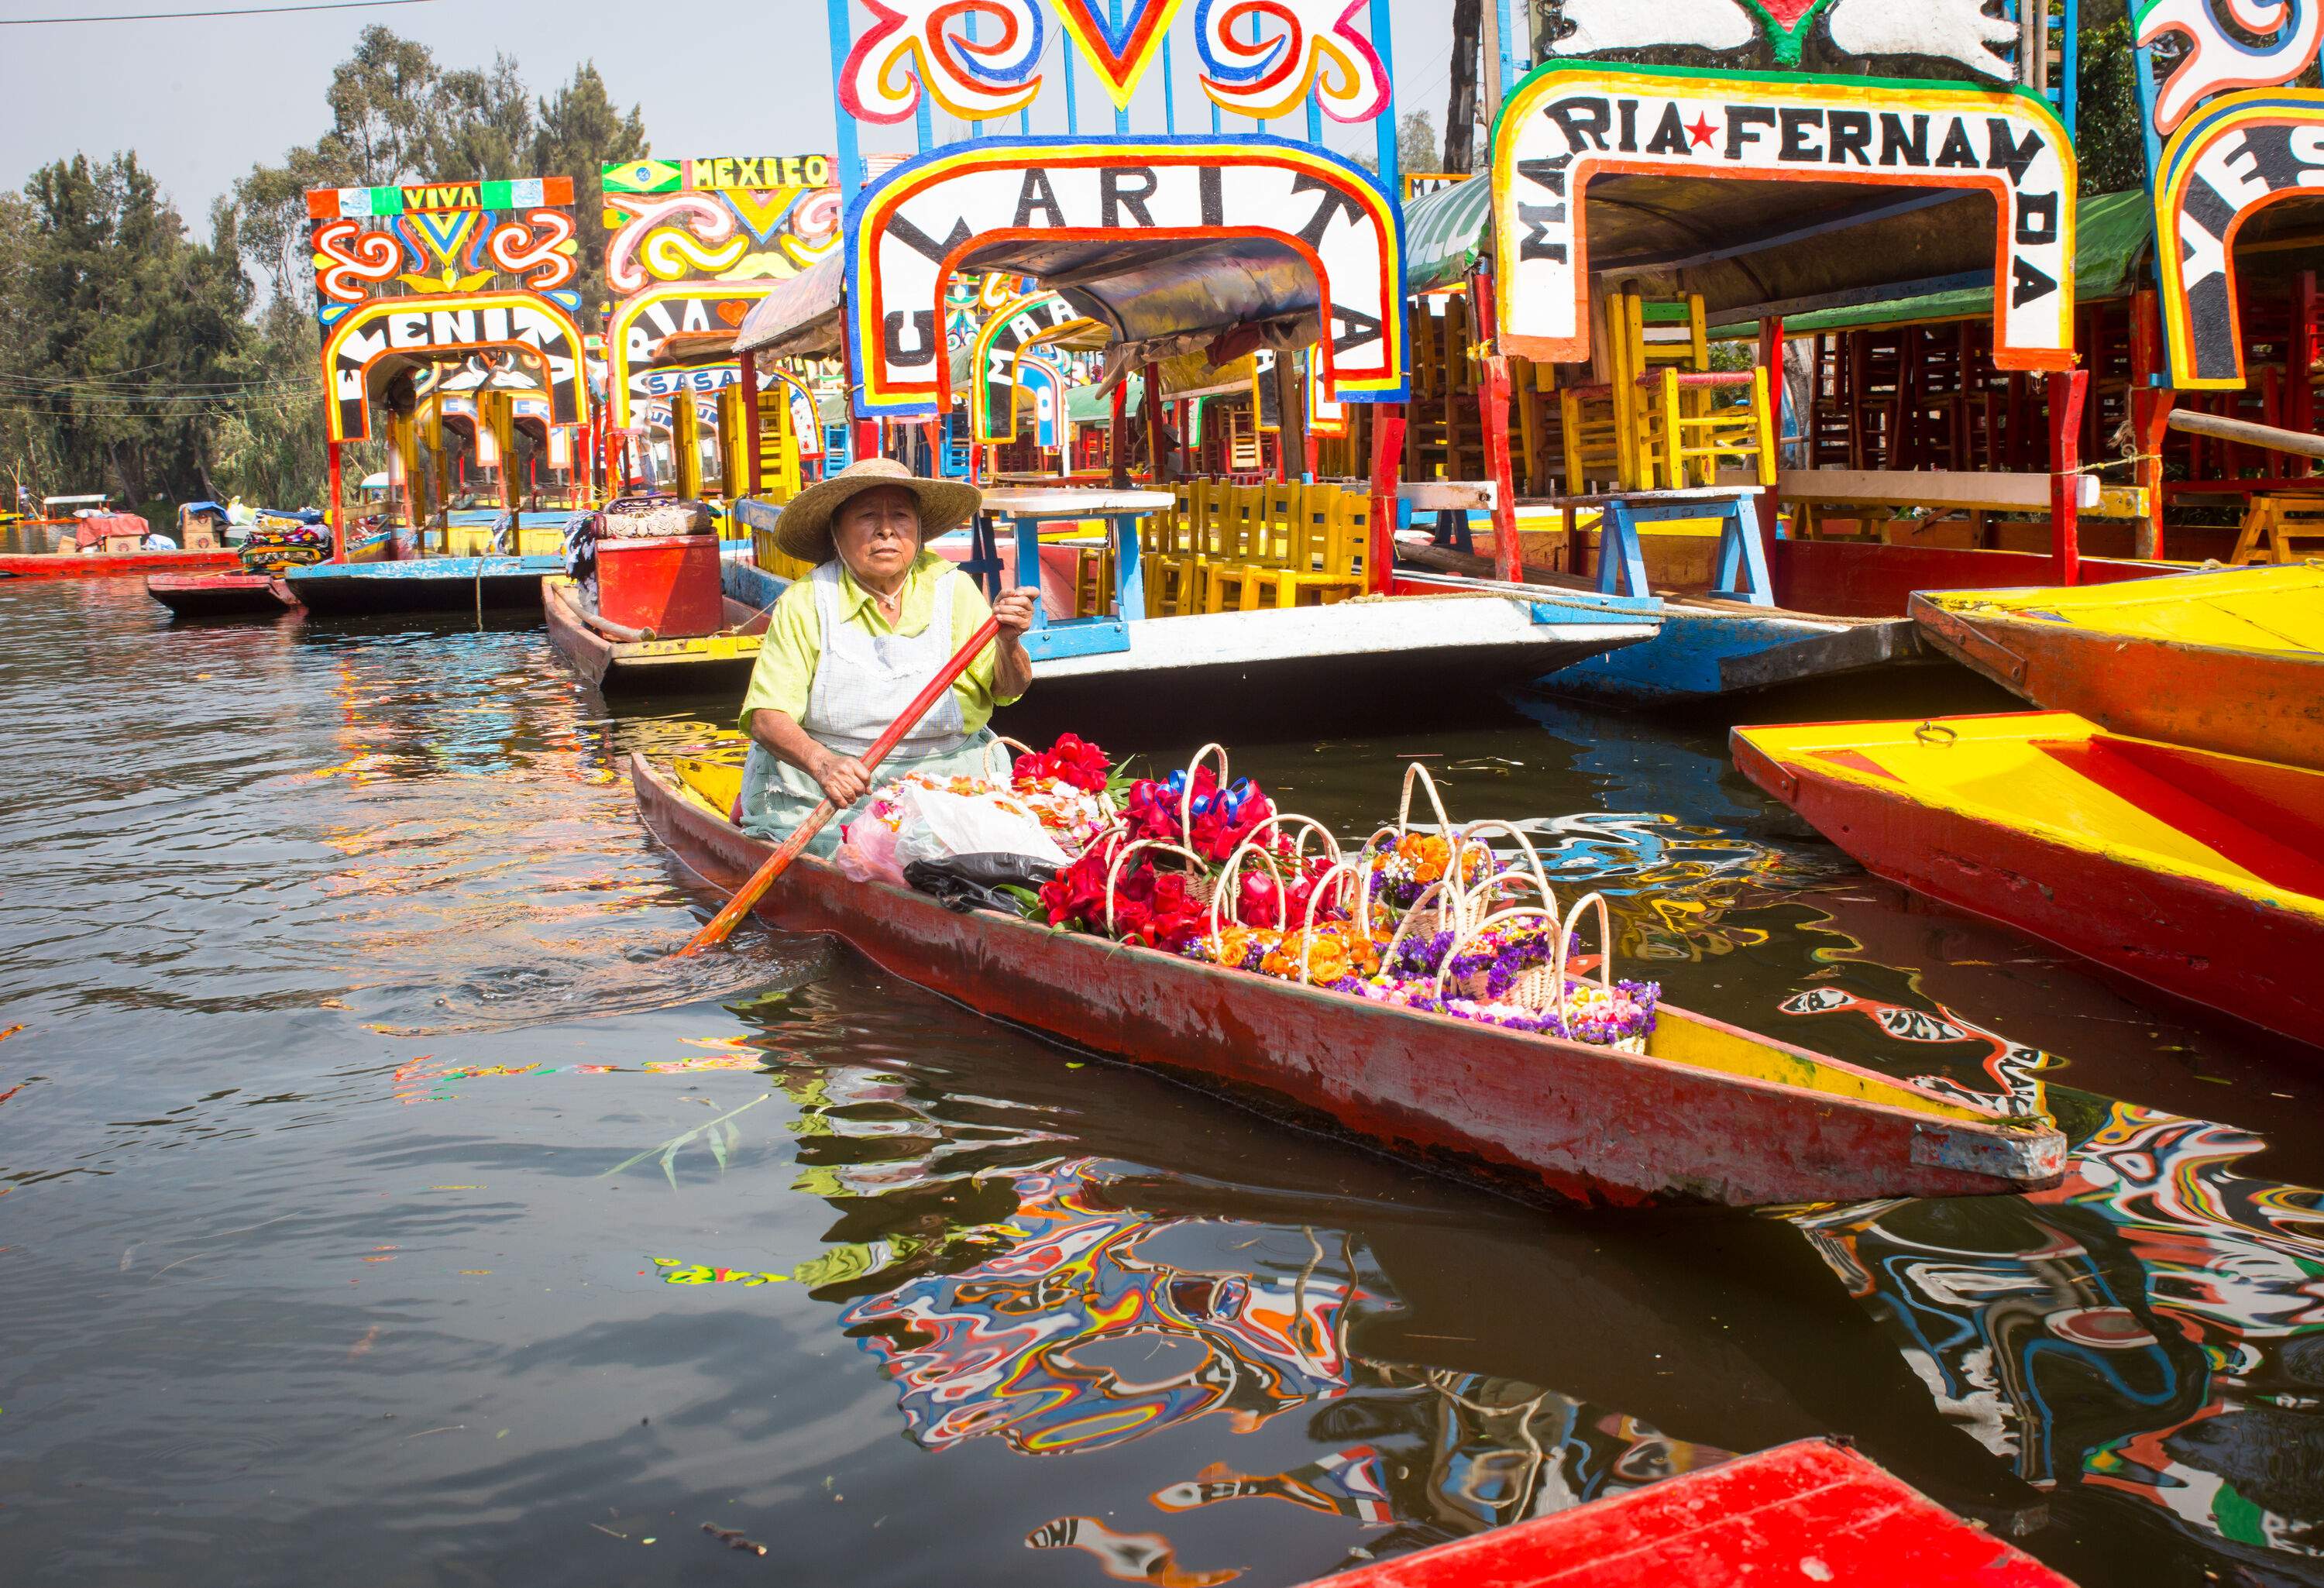 A woman in a row boat carrying multicoloured flower baskets passing by the trajineras floating in the water.